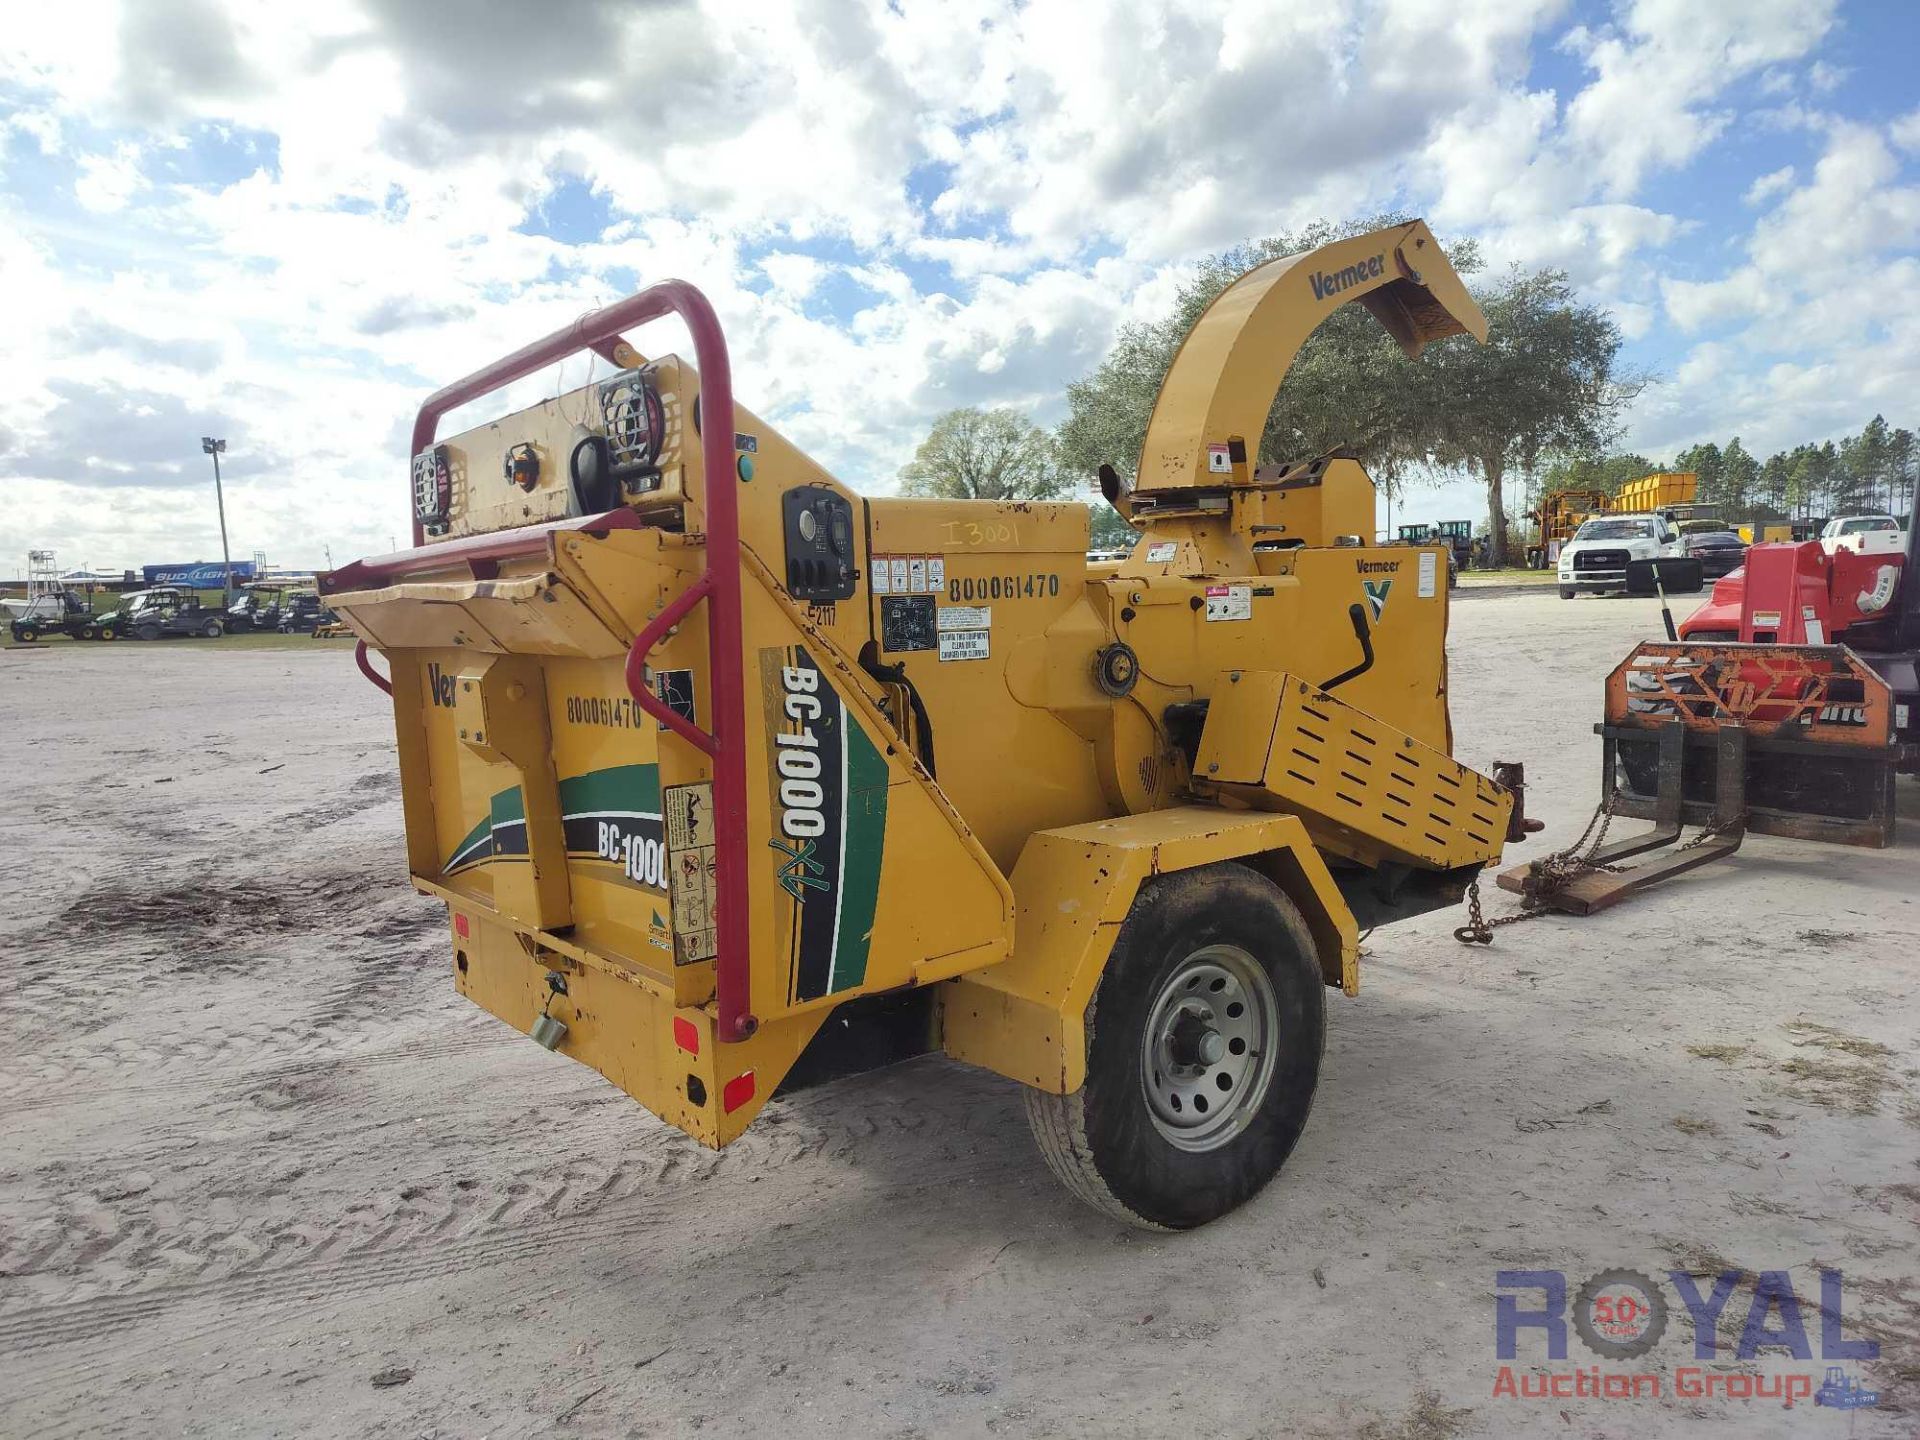 2015 Vermeer BC1000XL S/A Towable Brush Chipper - Image 3 of 17